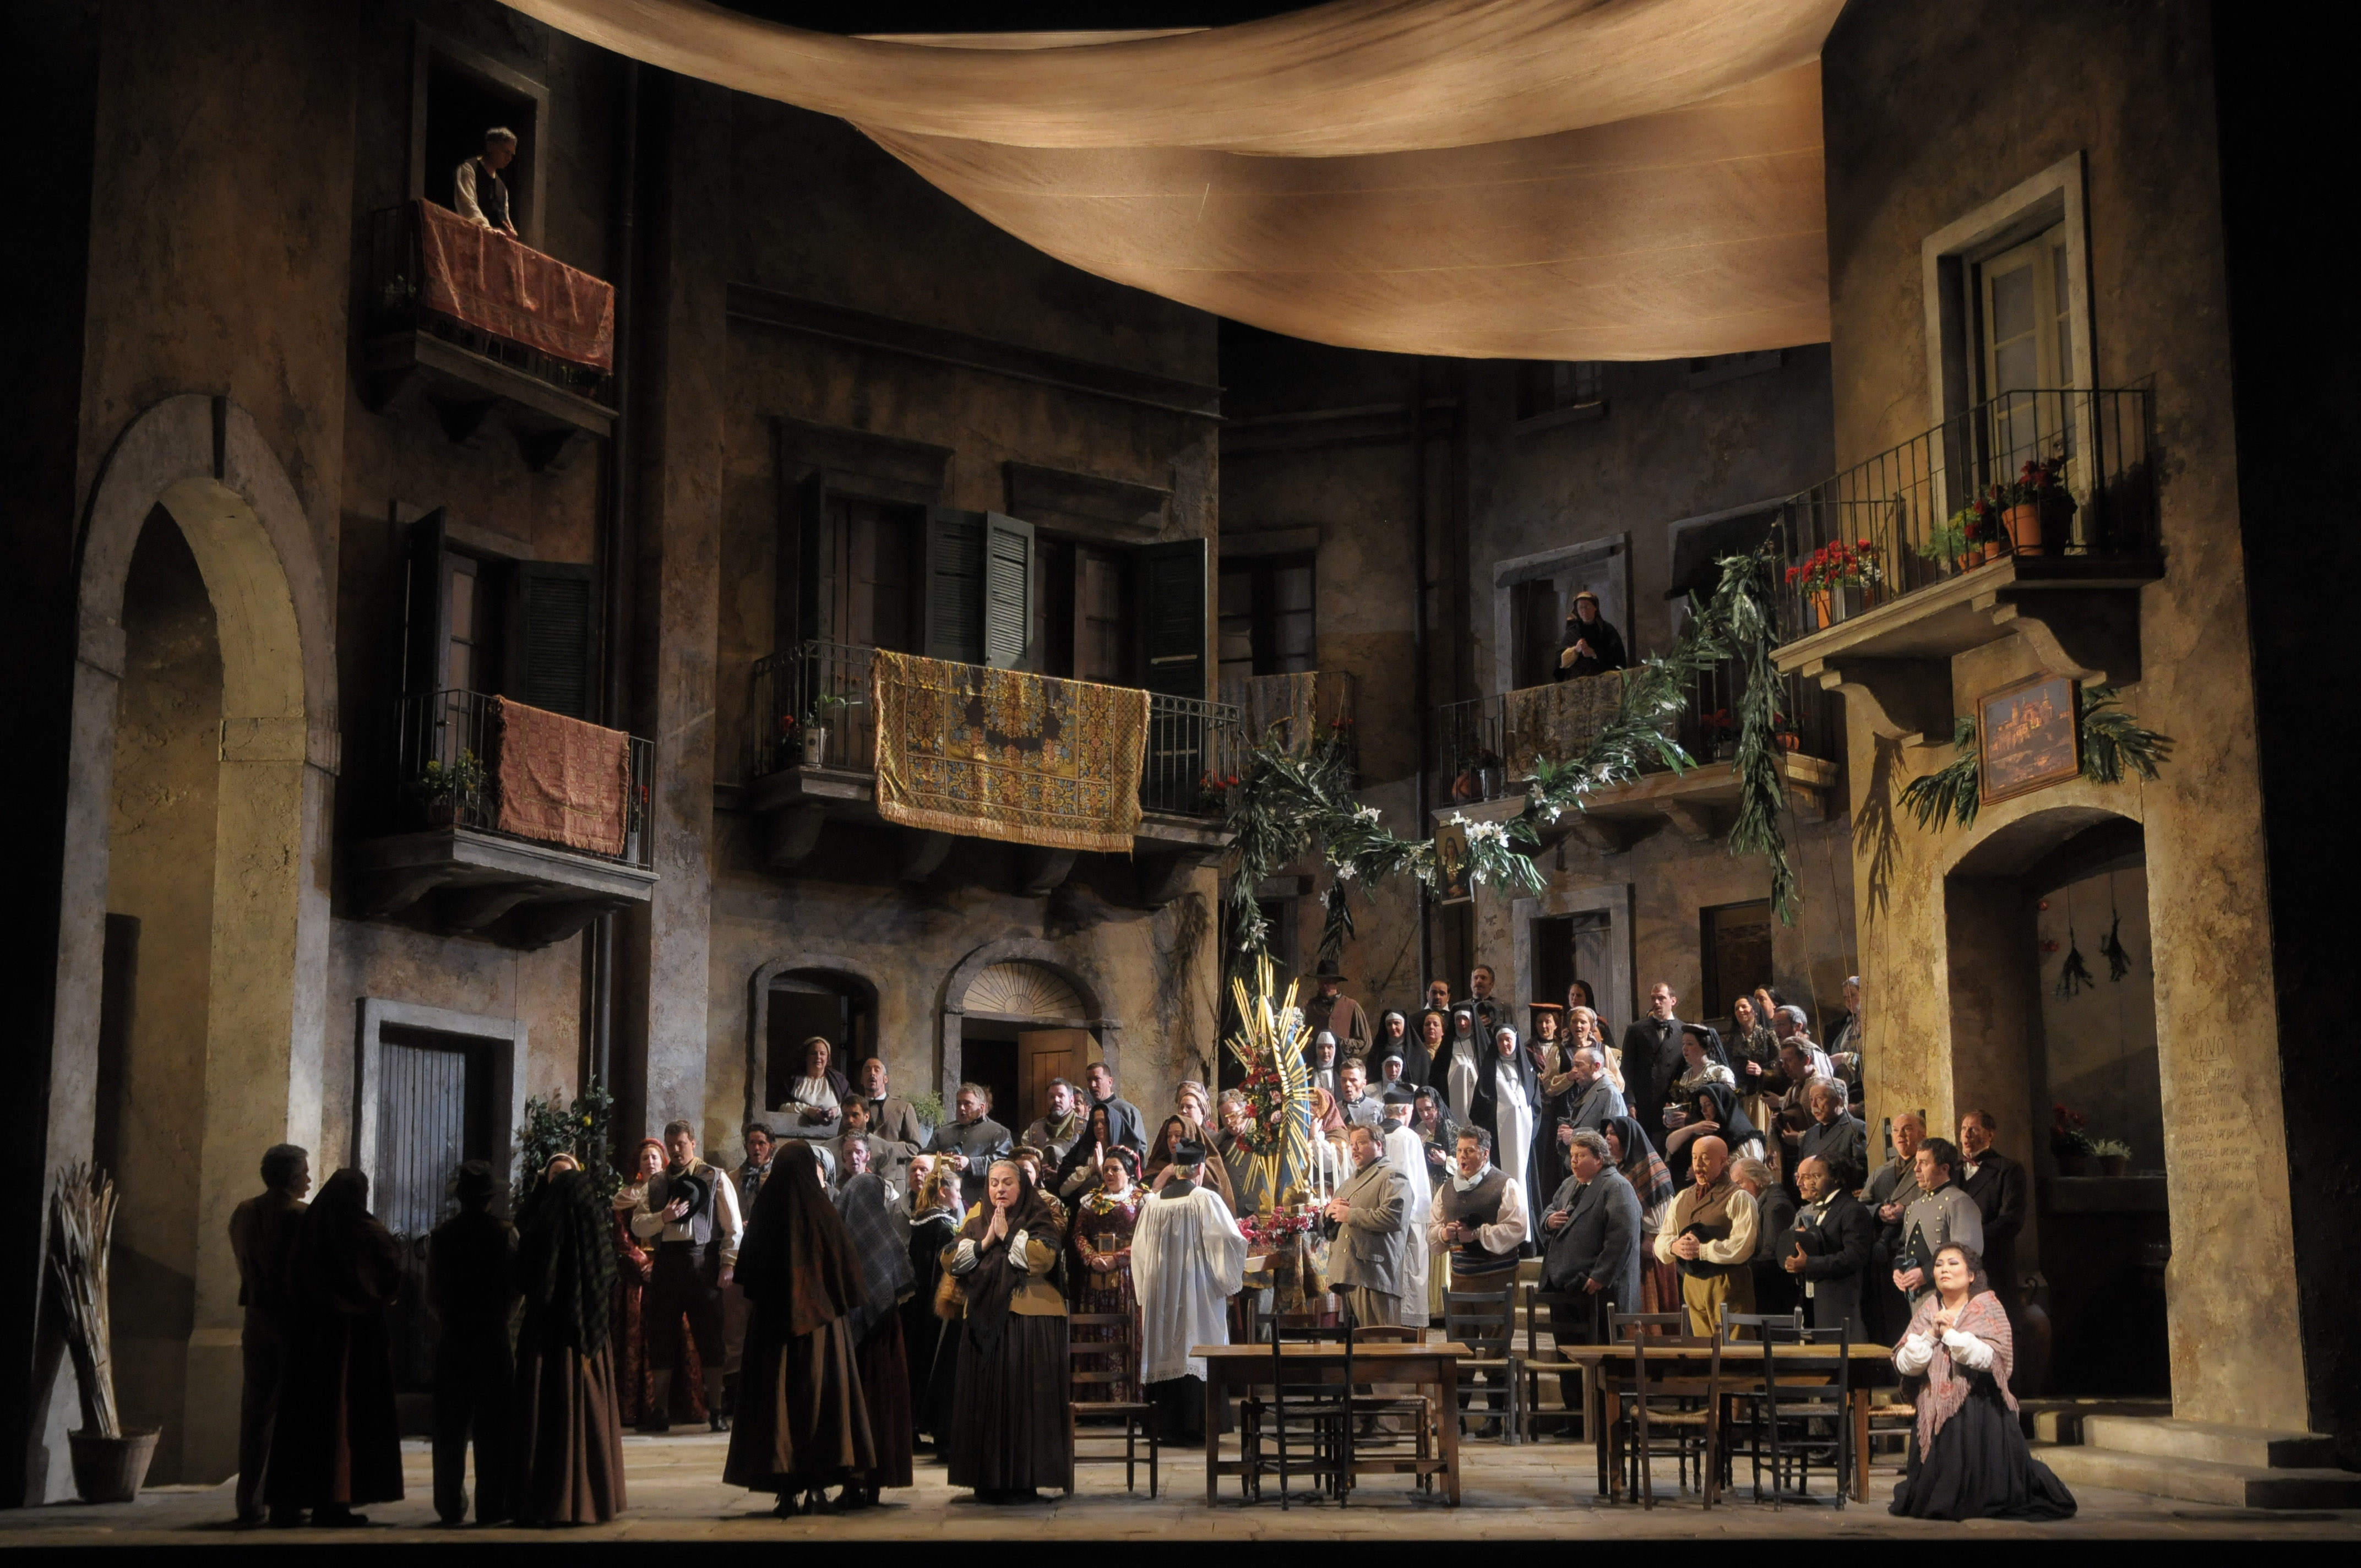 “Cavalleria rusticana” (pictured) is part of the double bill with “Pagliacci,” which open the Lyric Opera’s 2020-21 season.